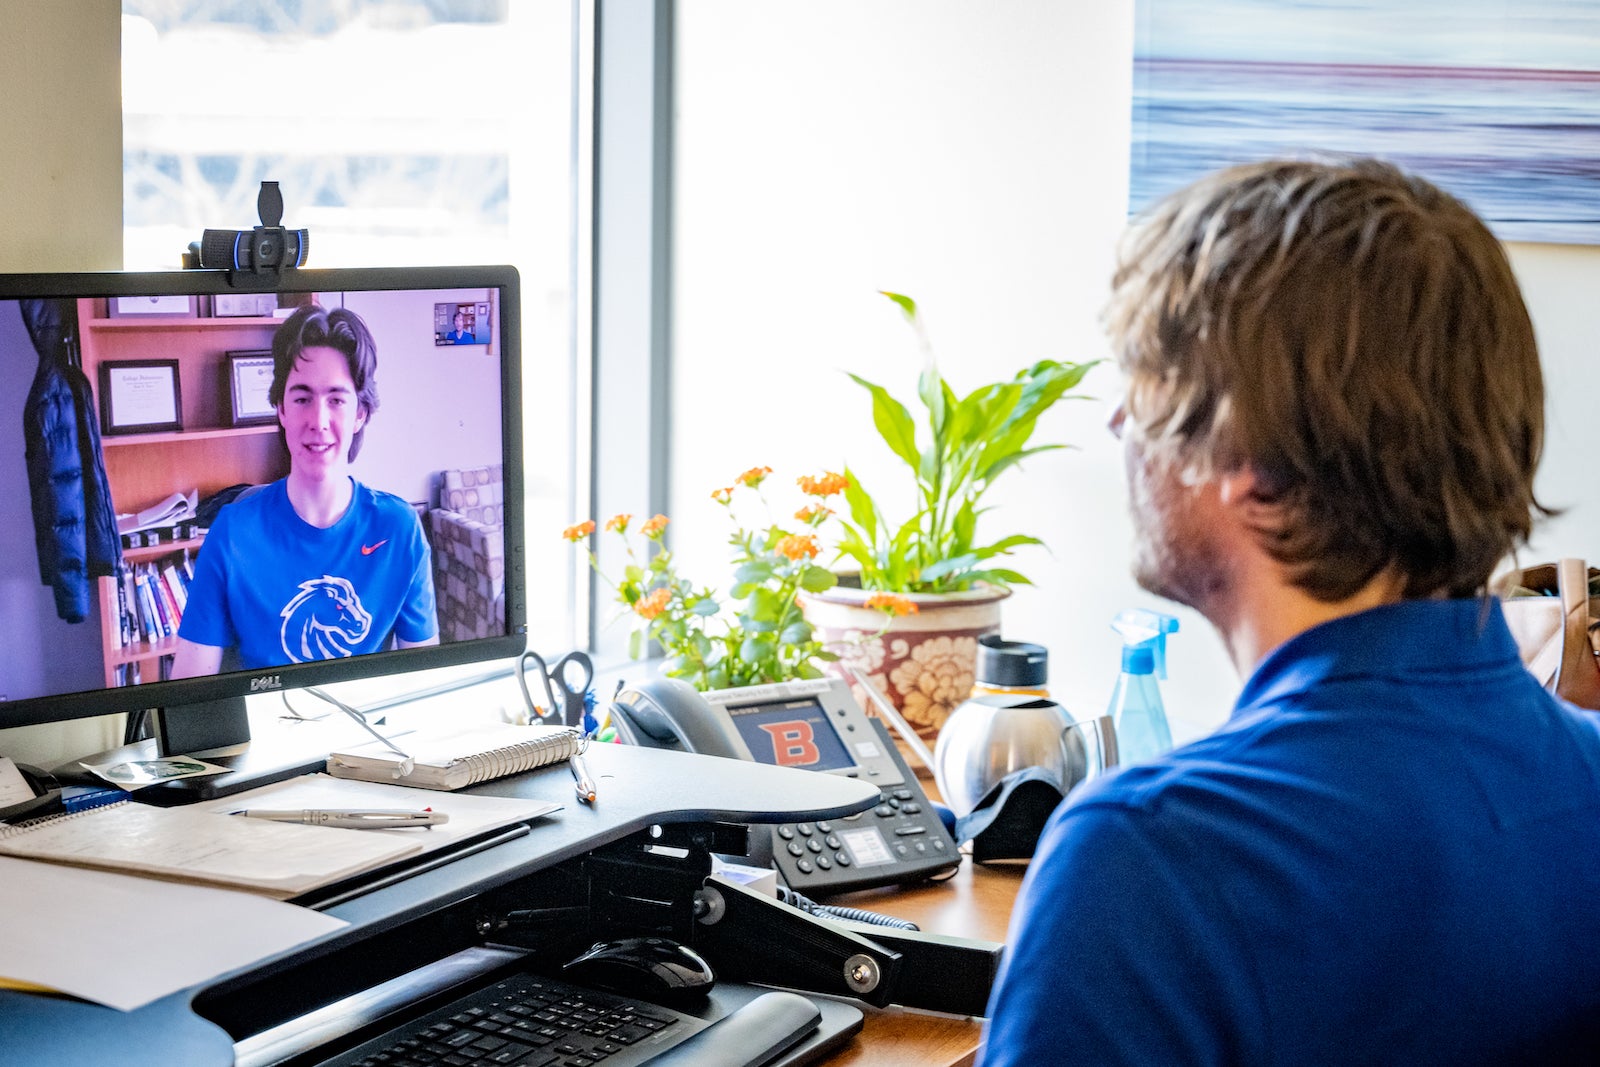 Student joining virtual meeting sitting in front of desk facing computer monitor